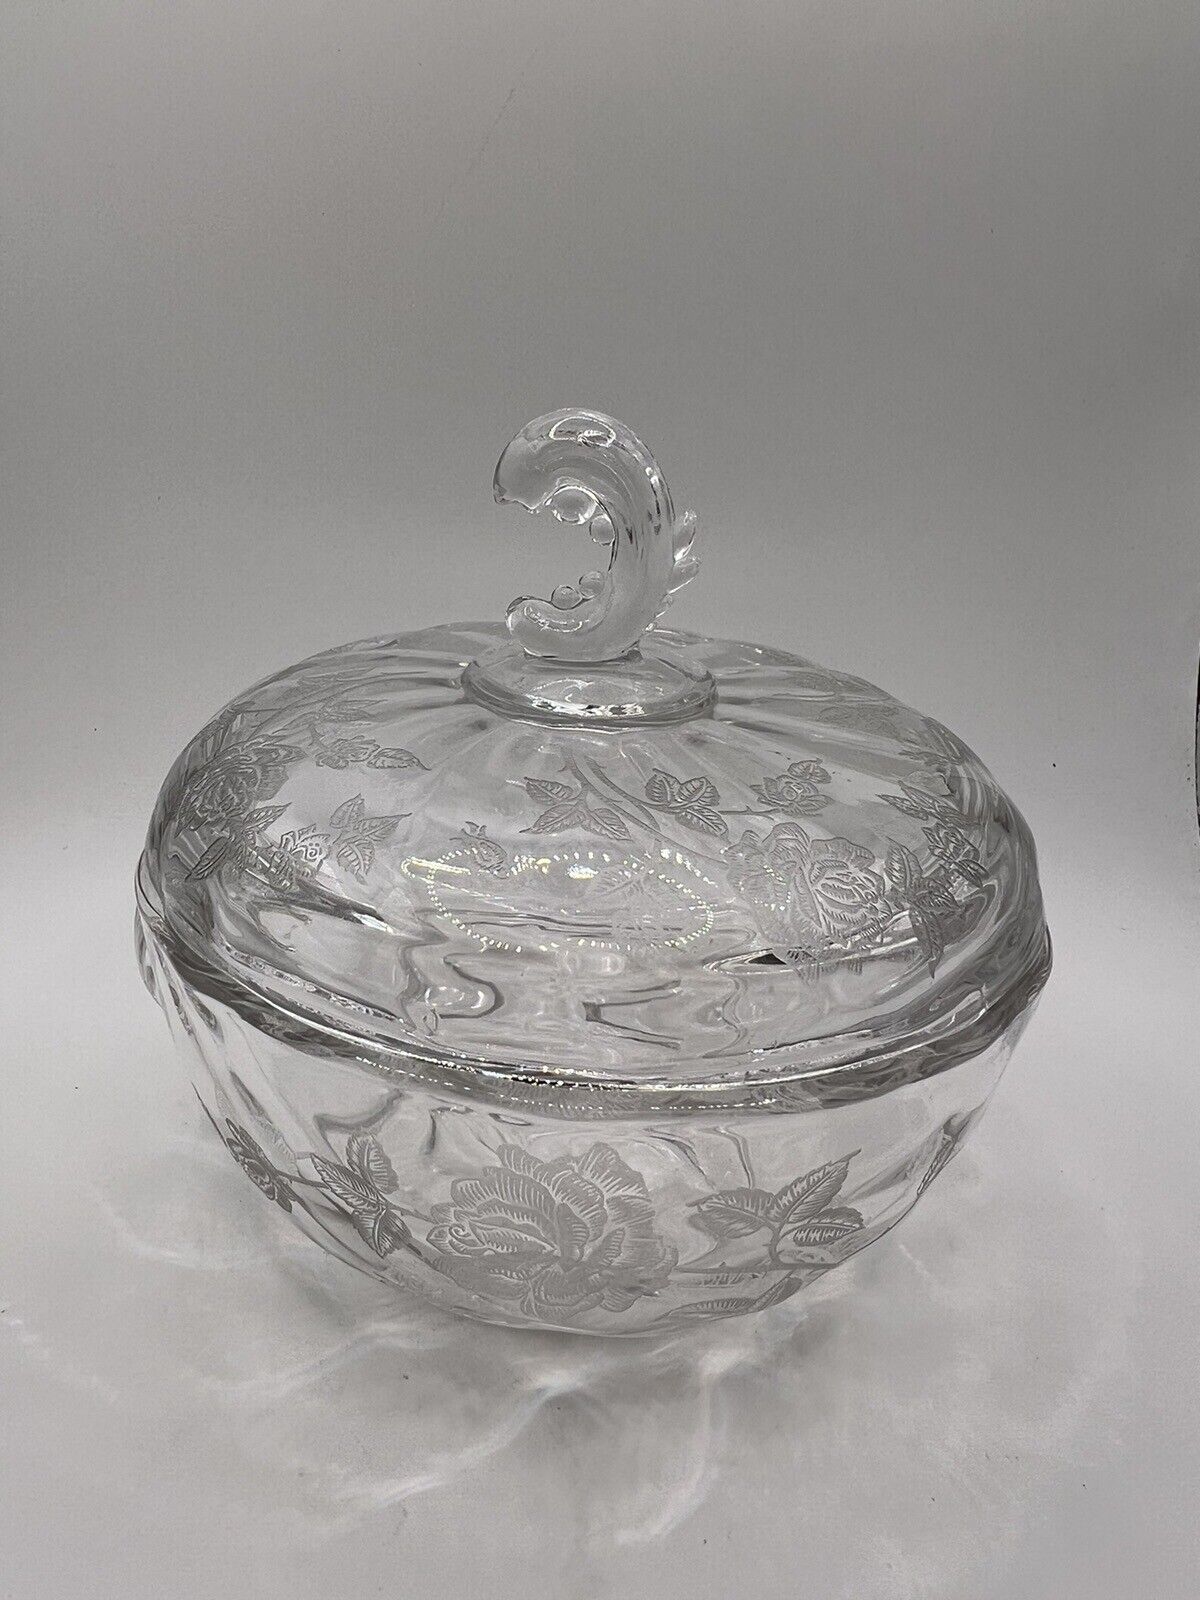 HEISEY ROSE ETCHED GLASS Wave Finial Lid CHOCOLATE DISH 5\' 1/4” Trinket Dish